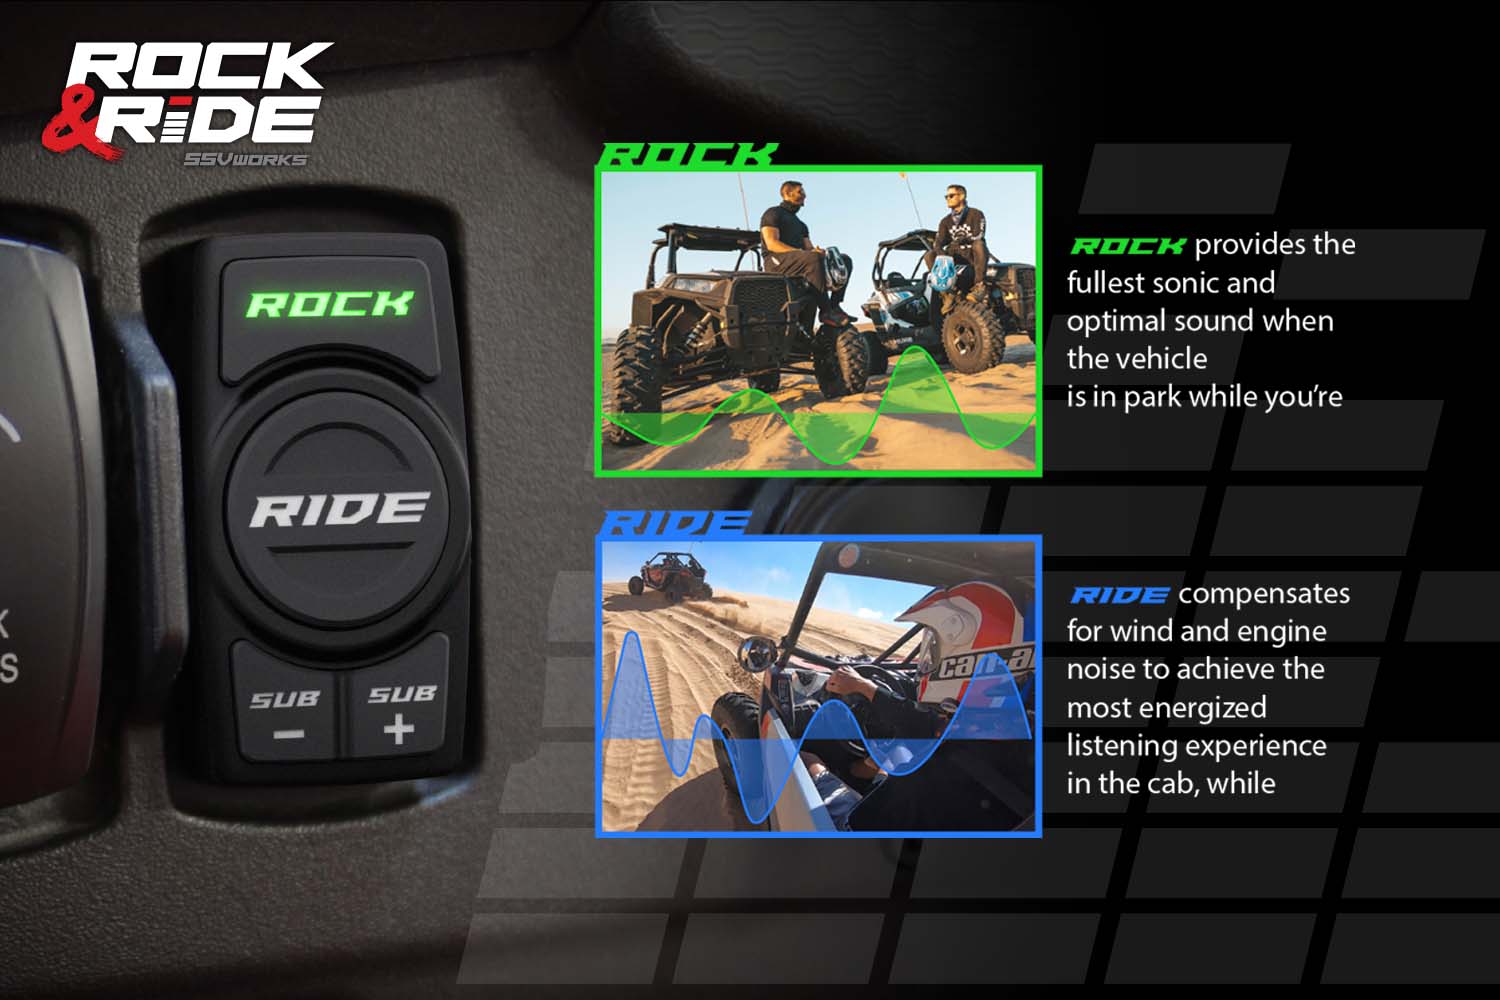 2014-2023 Polaris RZR Phase X SSV 5-Speaker Plug-&-Play System for Ride Command - OffRoad HQ